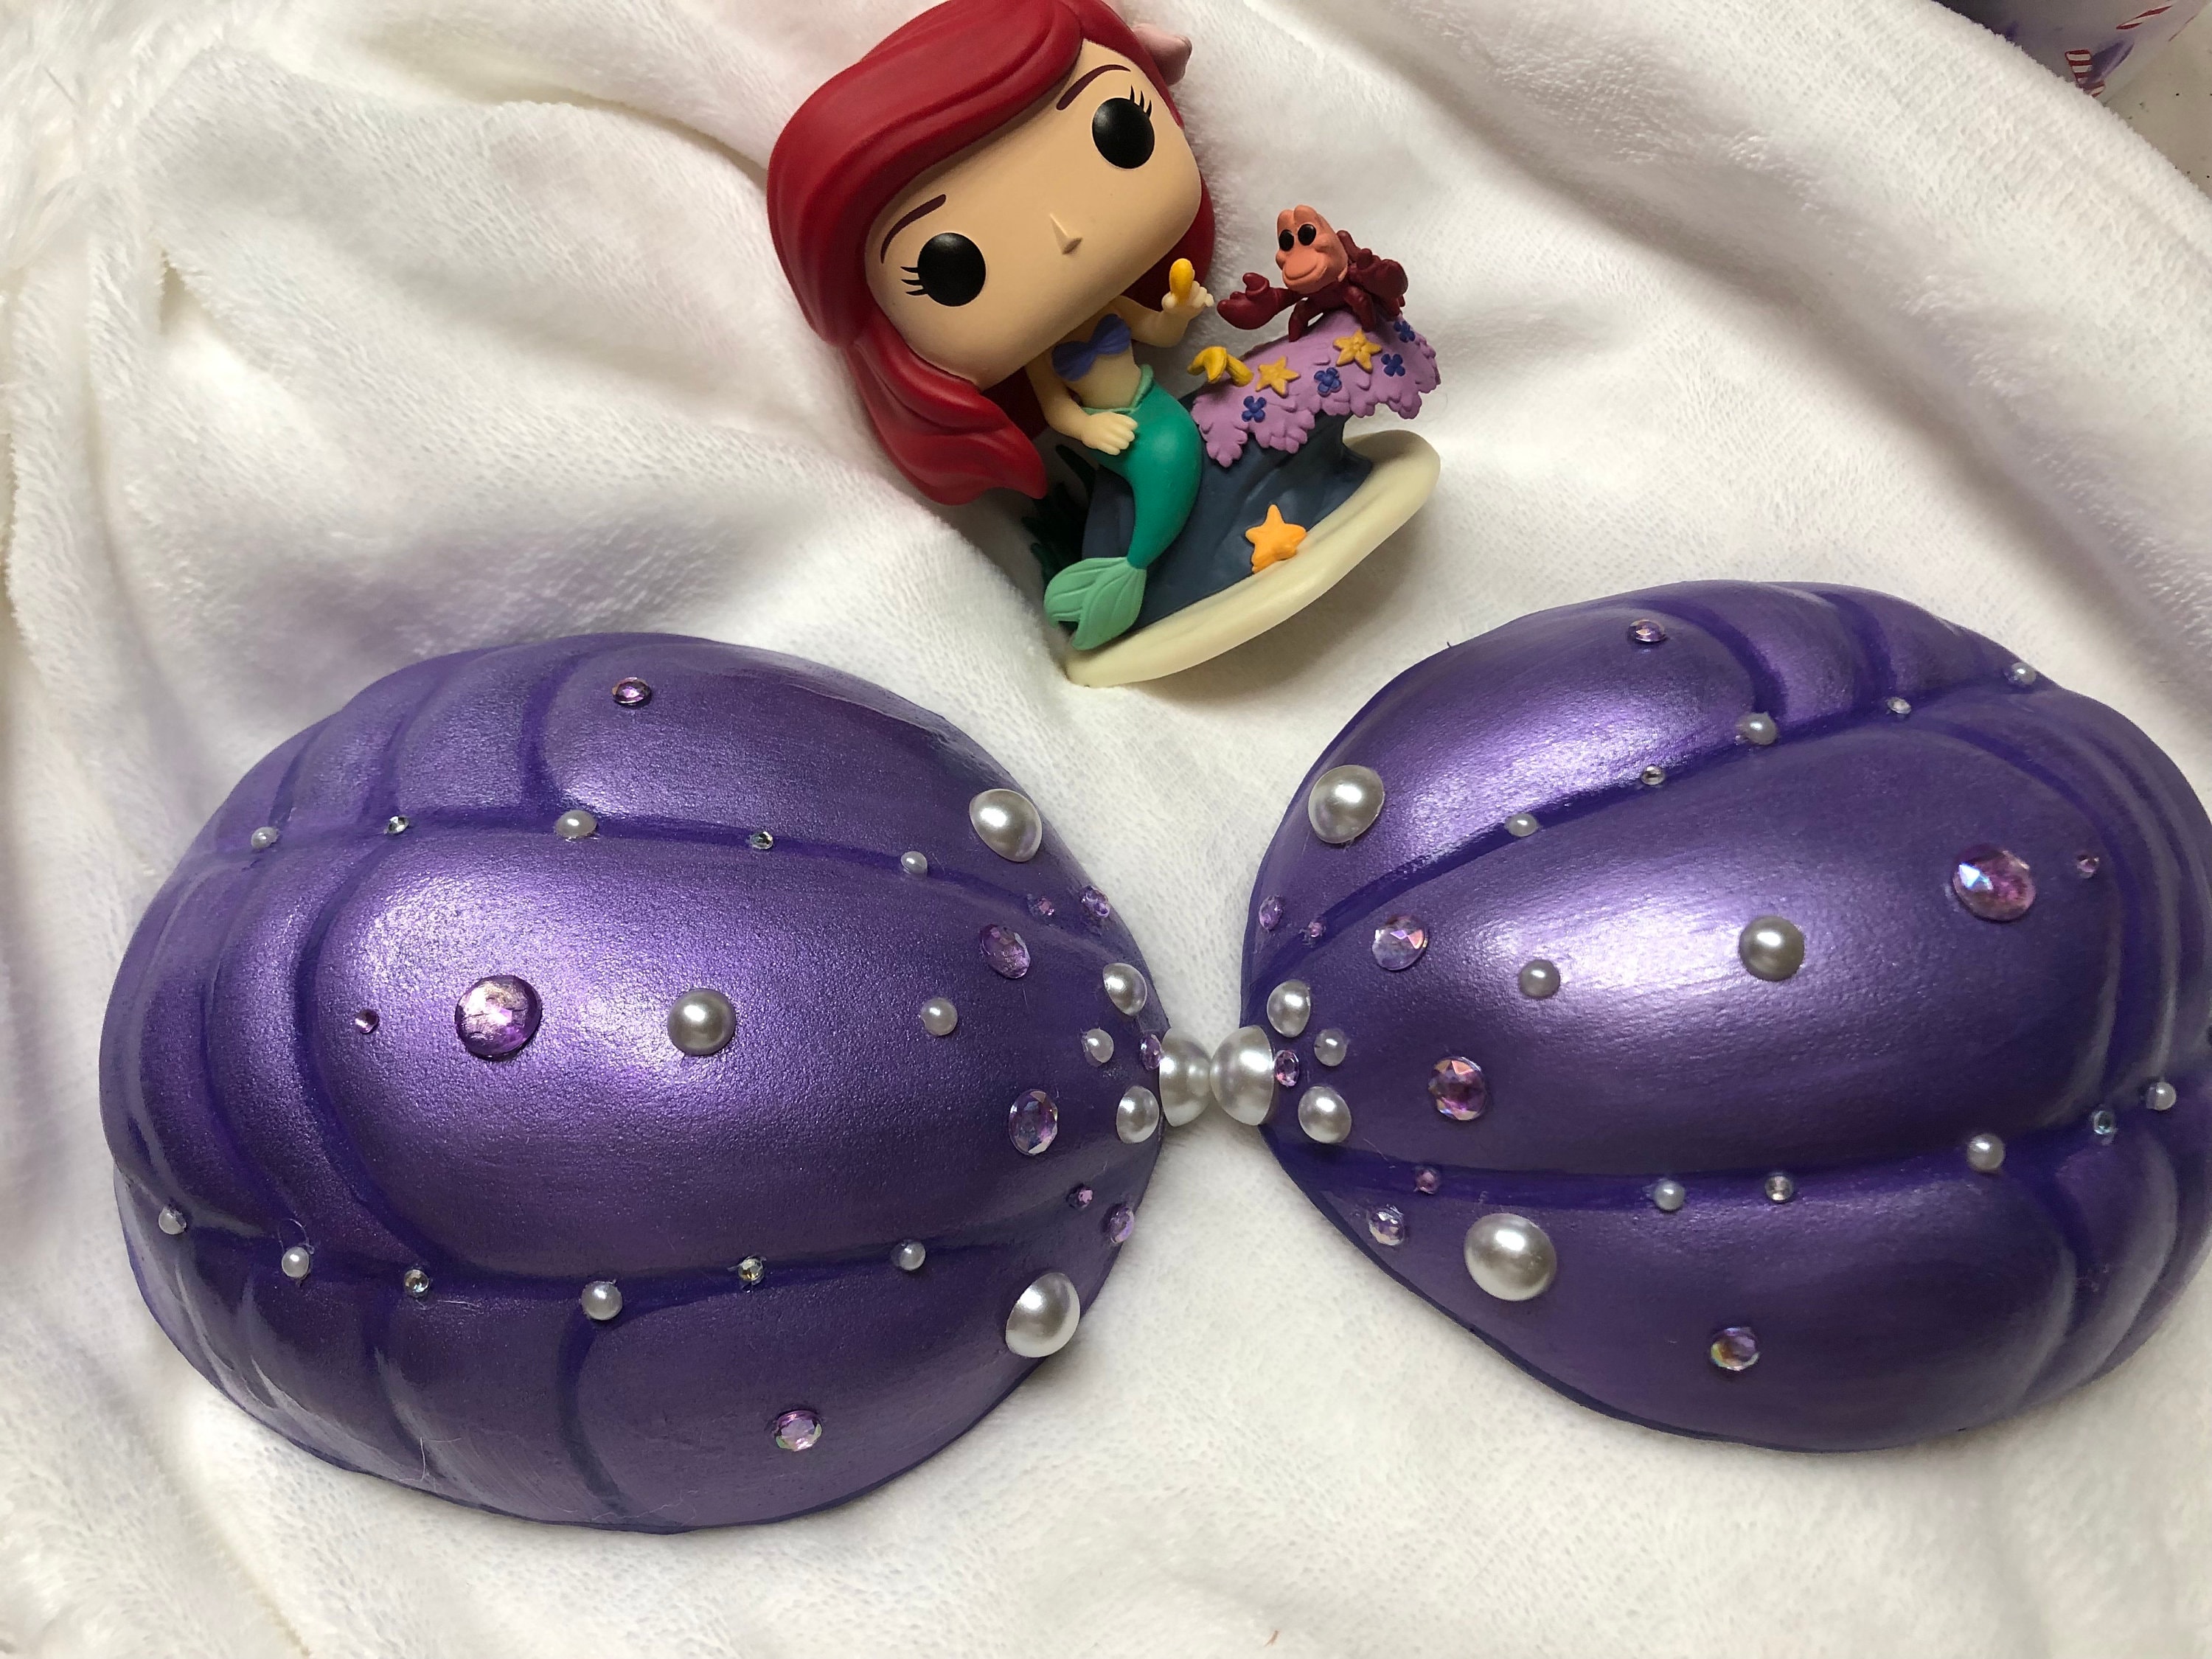 Little Mermaid Princess Ariel Inspired Shell Bra Top Costume for Cosplay,  Parties, Childrens Entertainers and More made to Order 